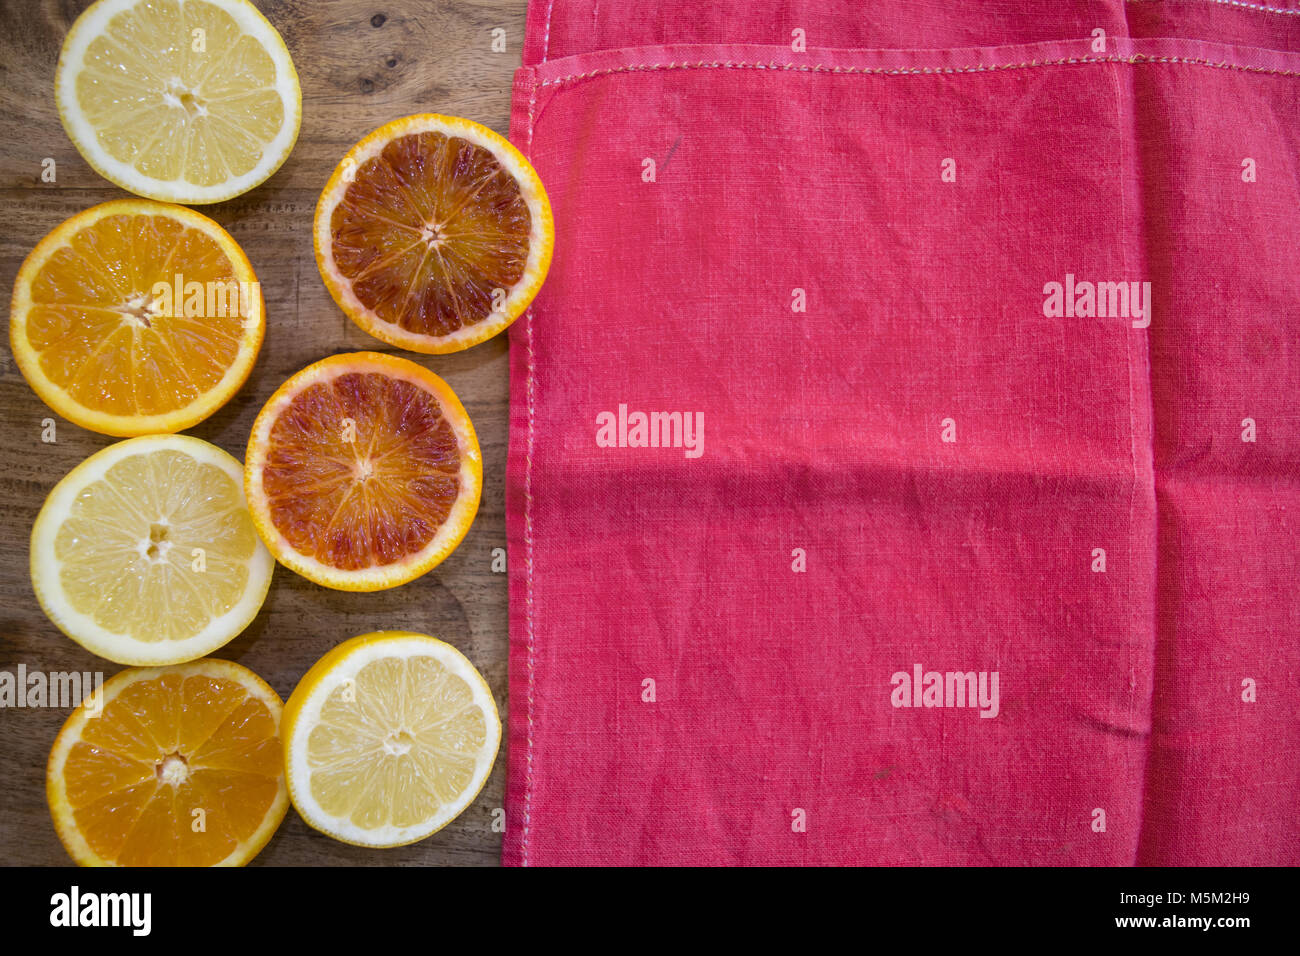 oranges and lemons cut half and neal a red napkin Stock Photo